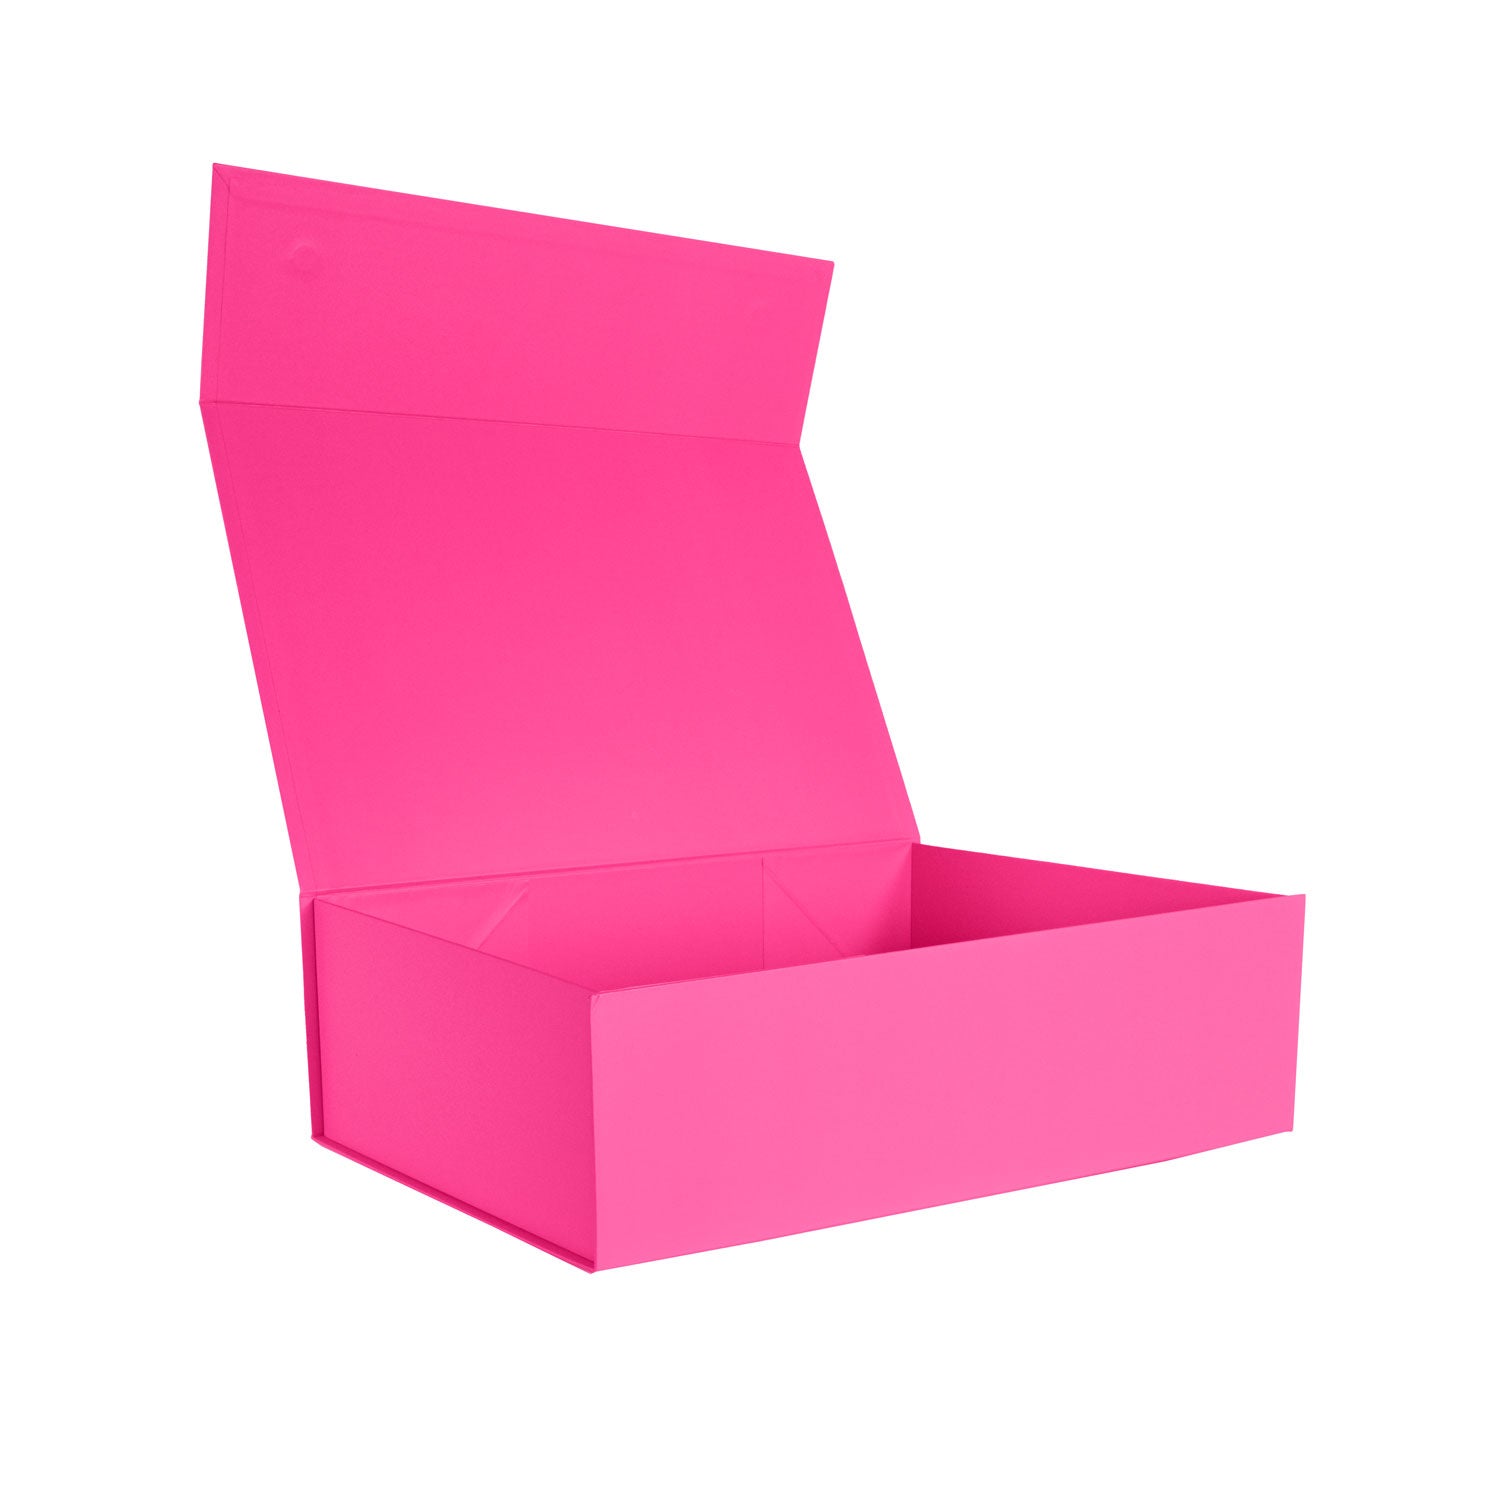 Pink large gift box for your businesses